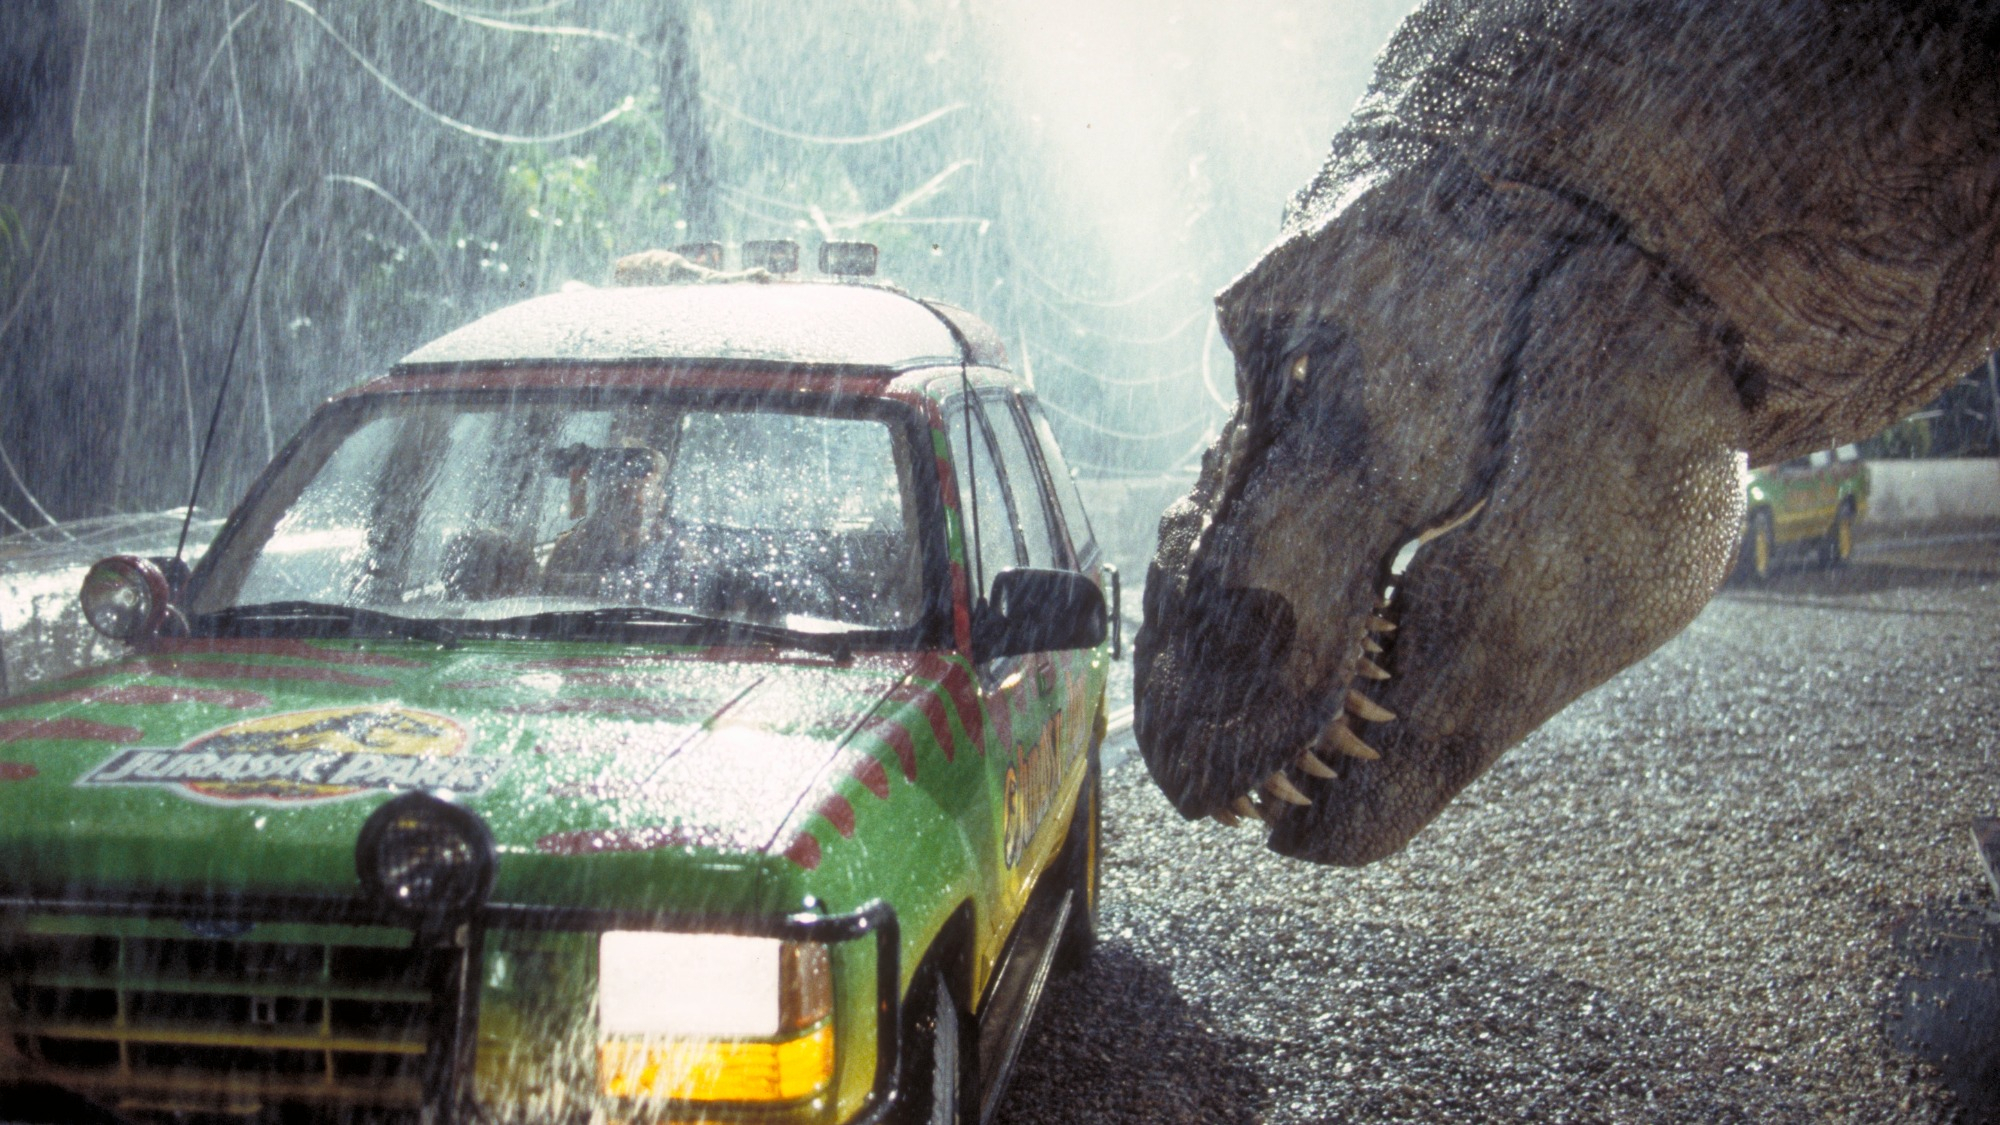 Celebrate 30 years of Jurassic Park with these recent dinosaur discoveries